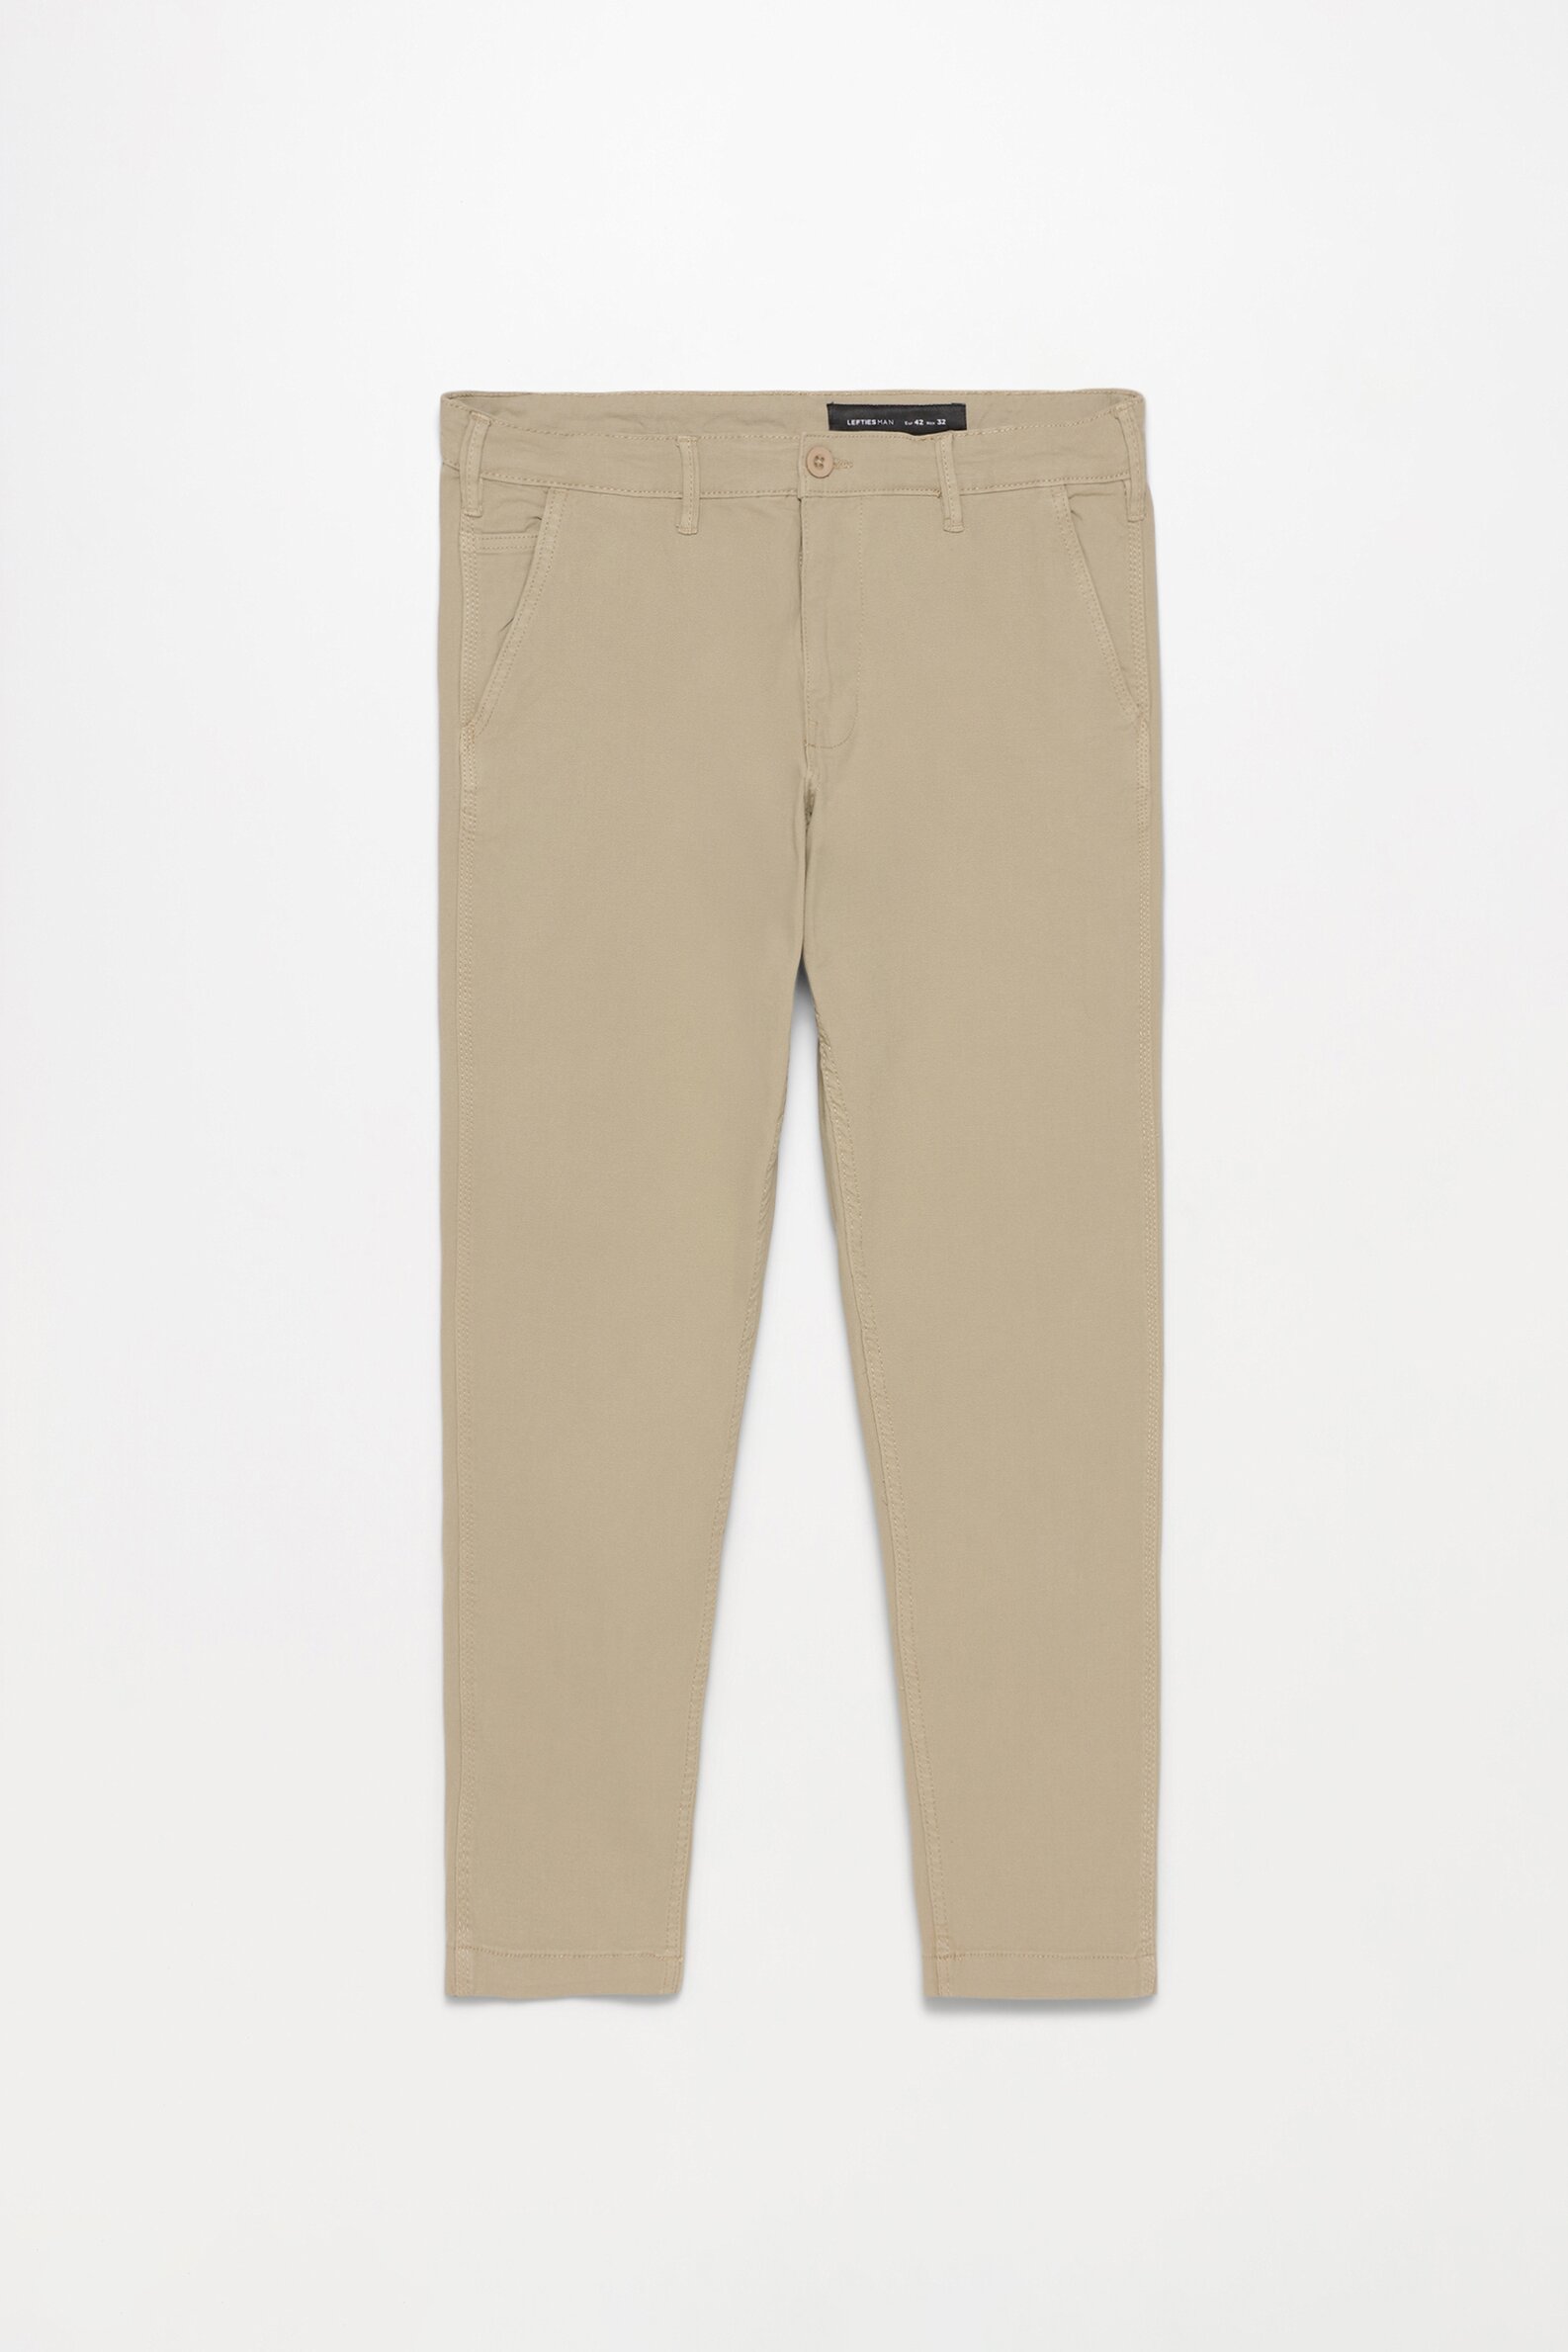 Rustic chinos - Trousers - CLOTHING - Man 